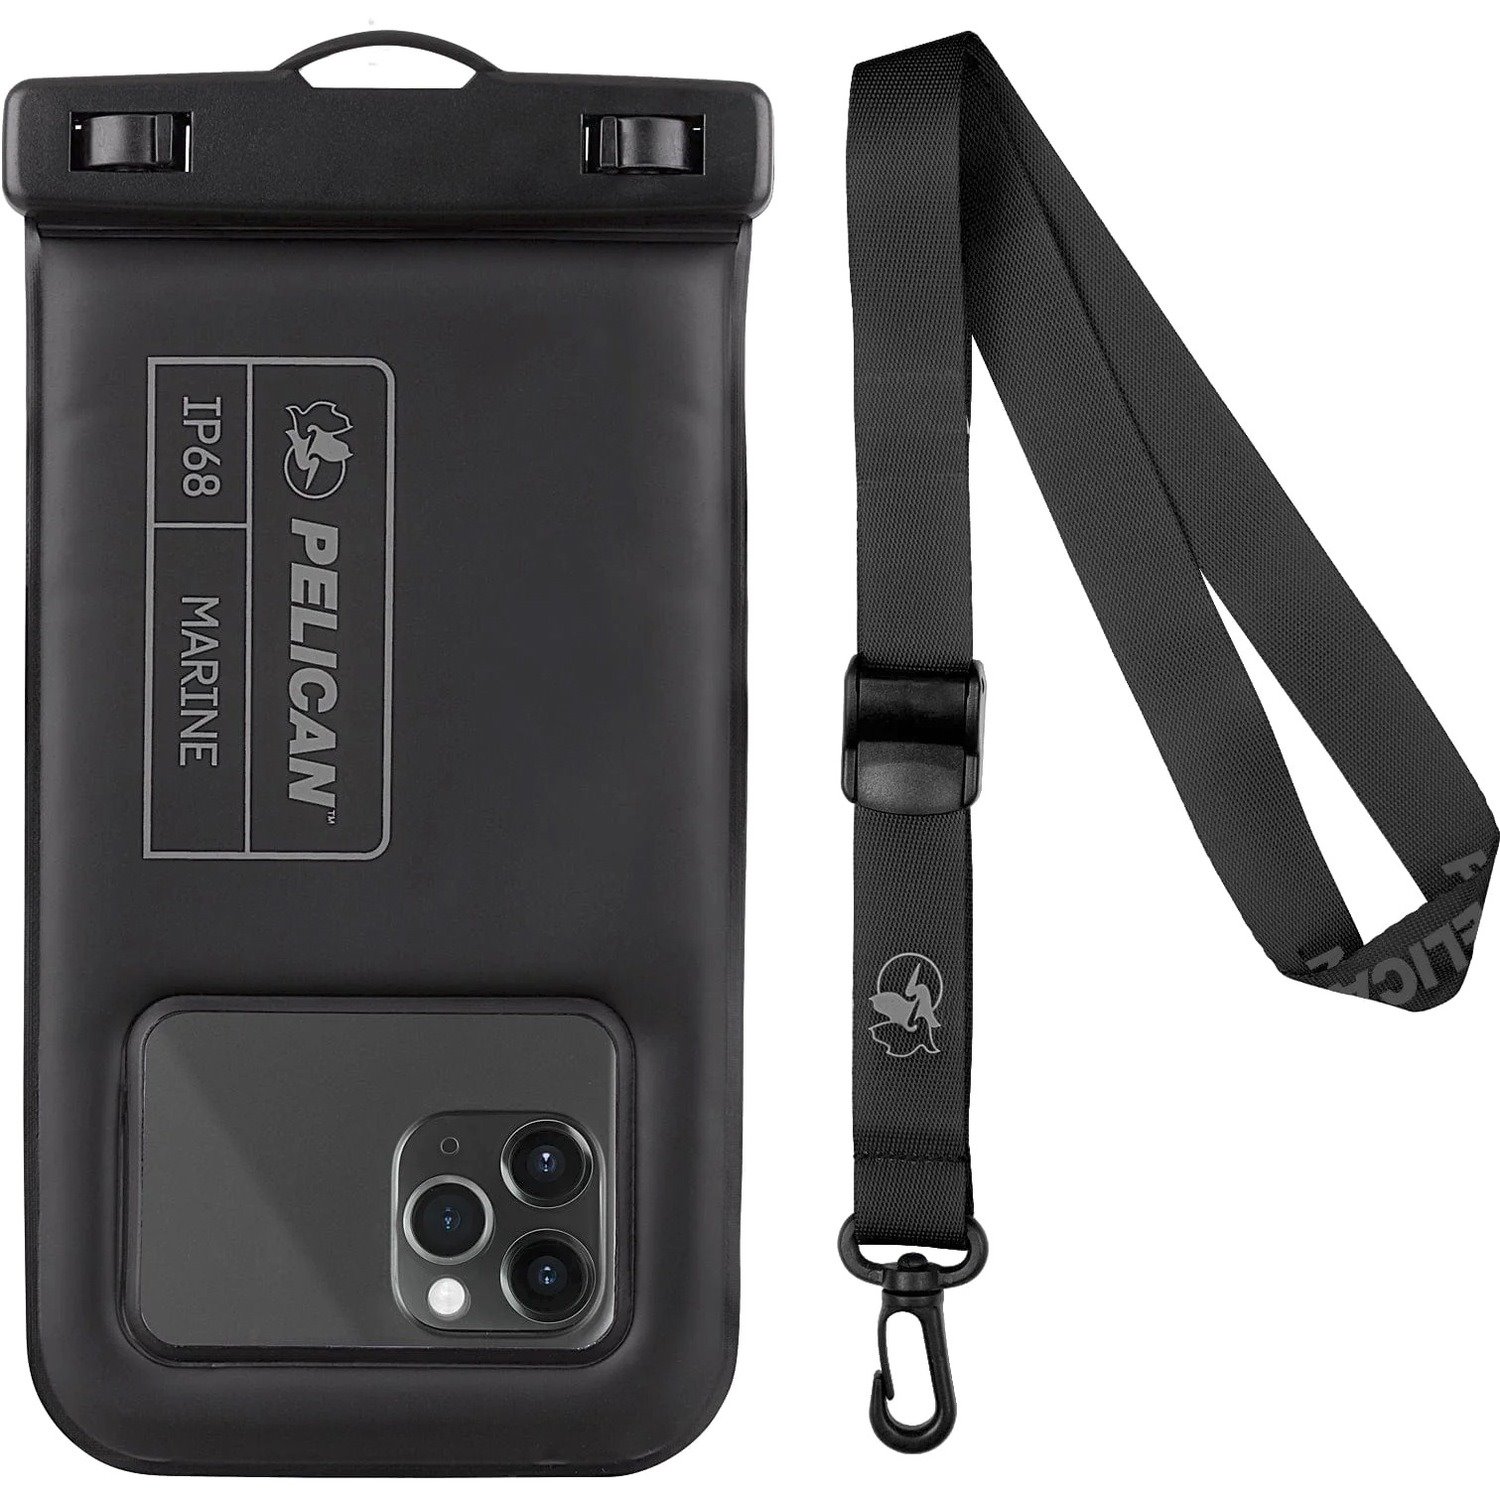 Pelican Marine Carrying Case (Pouch) Smartphone - Stealth Black